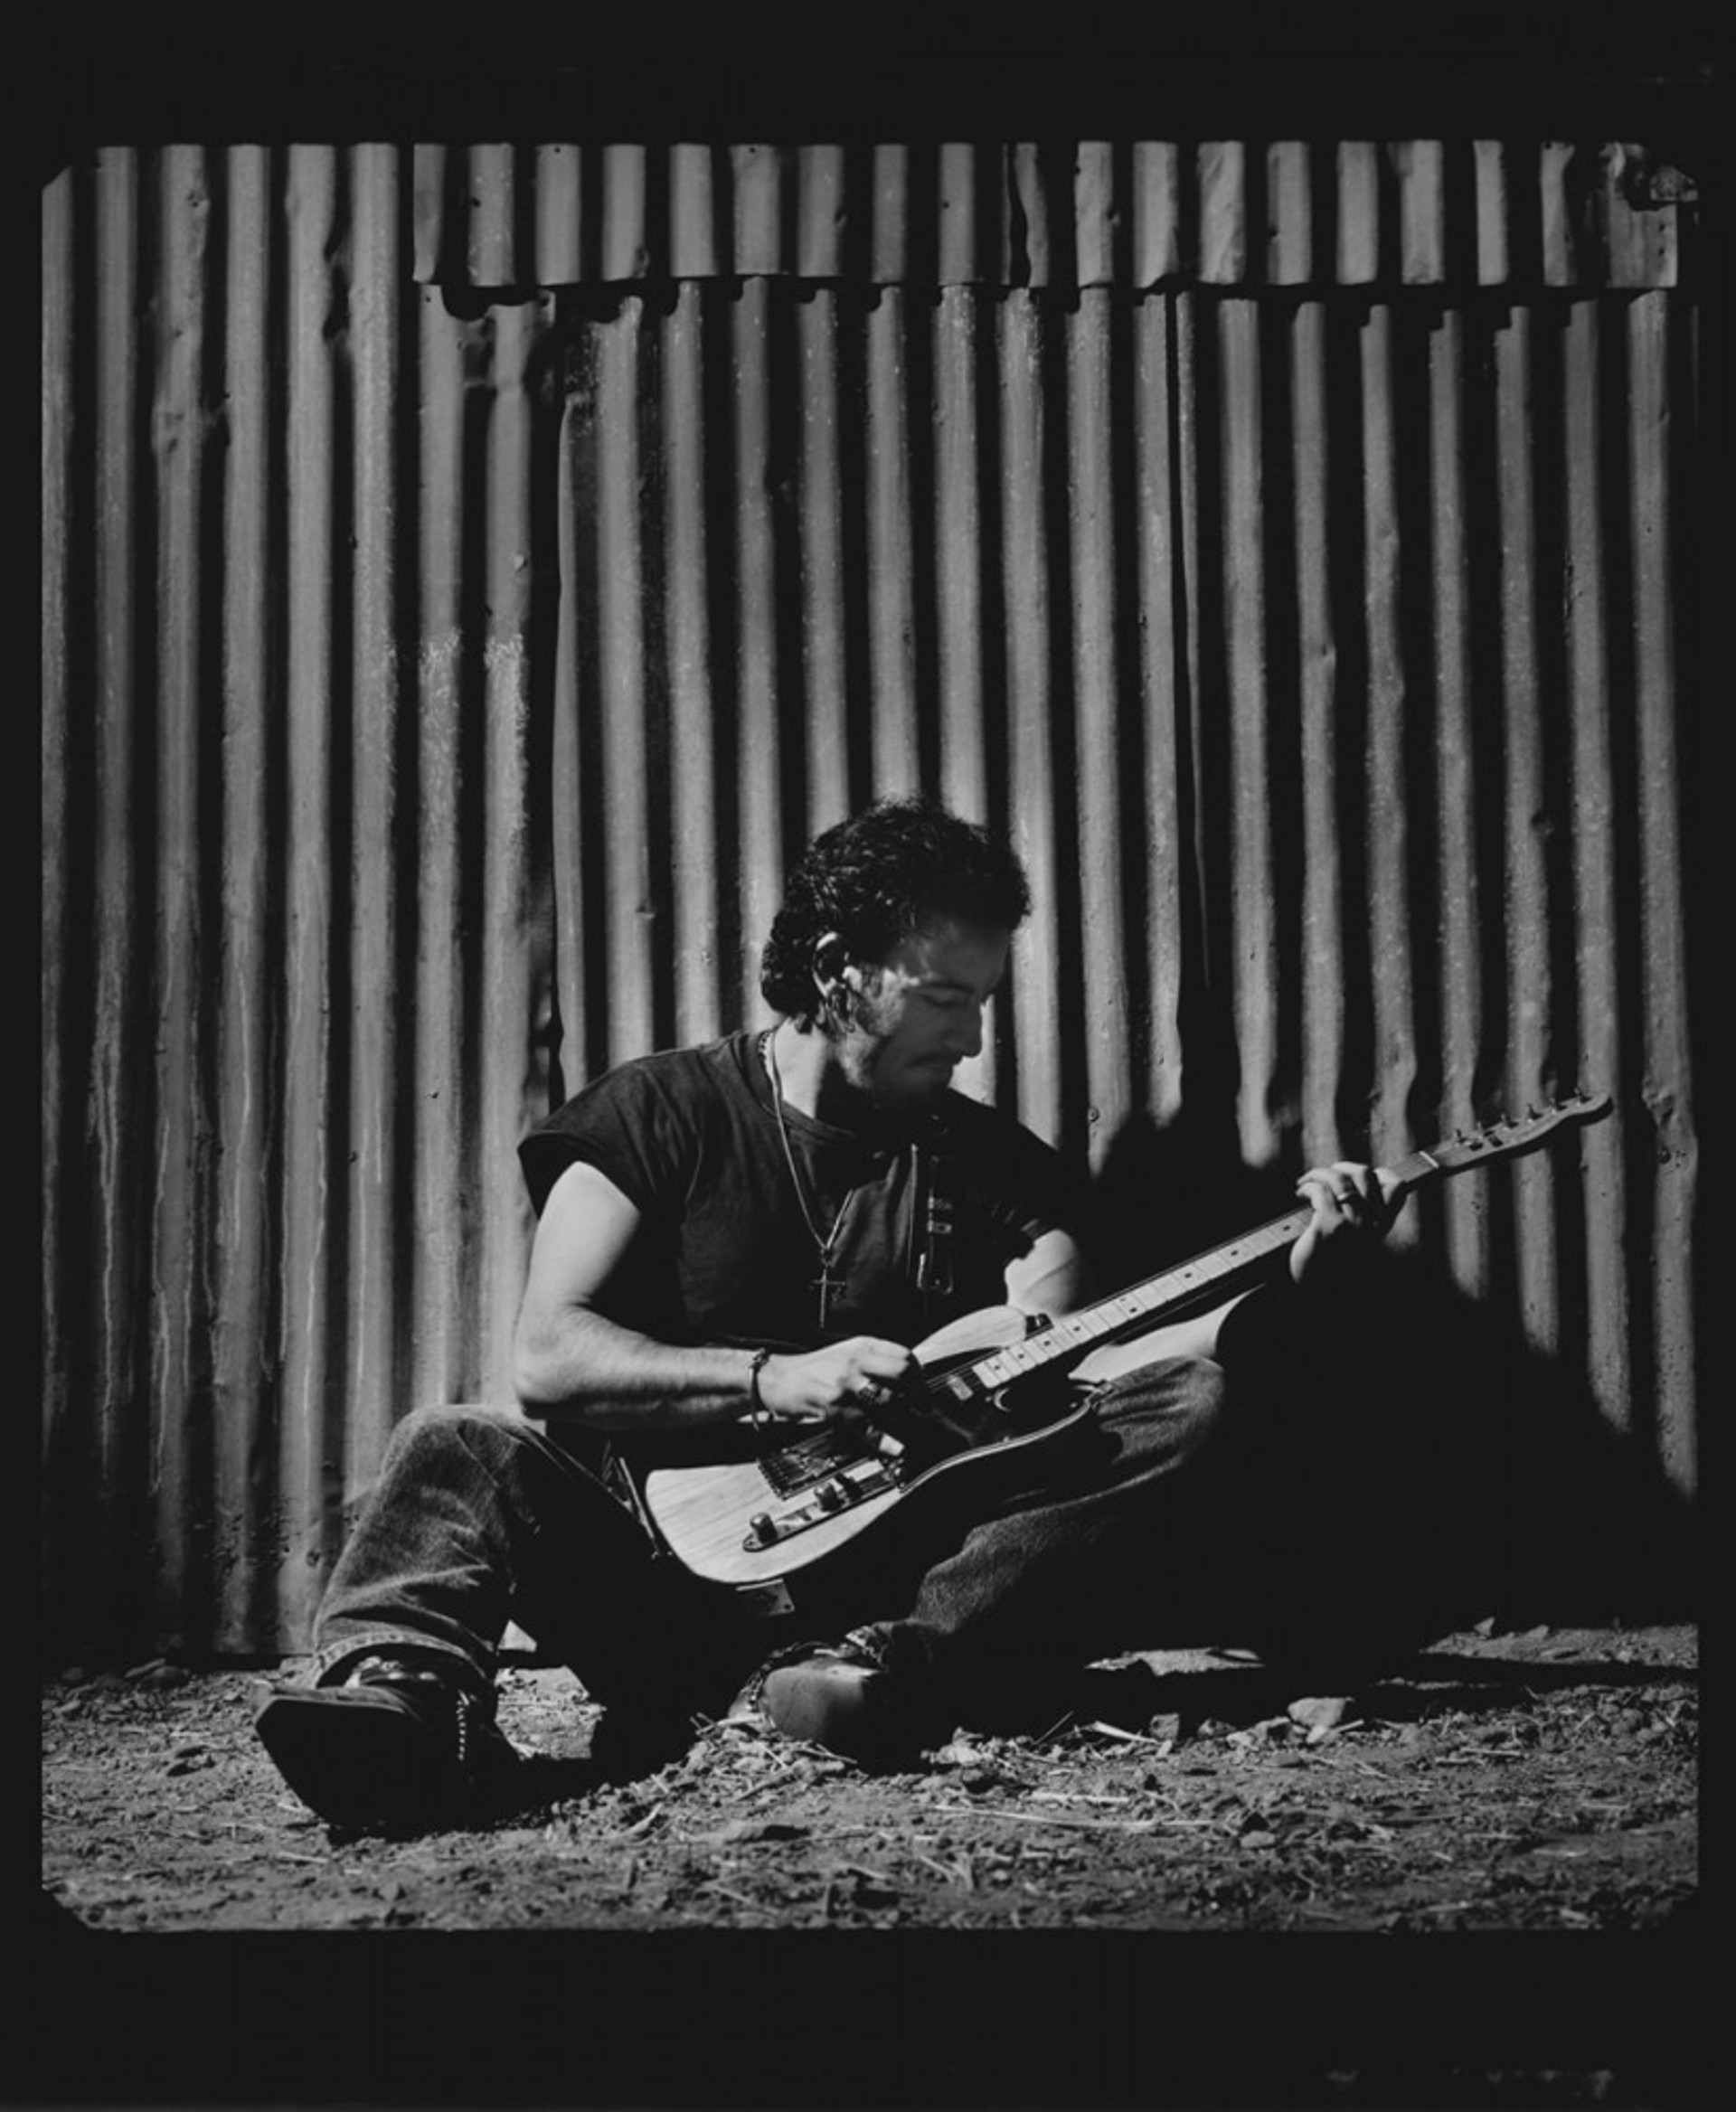 91152 Bruce Springsteen Seated on Corrugated Wall BW by Timothy White